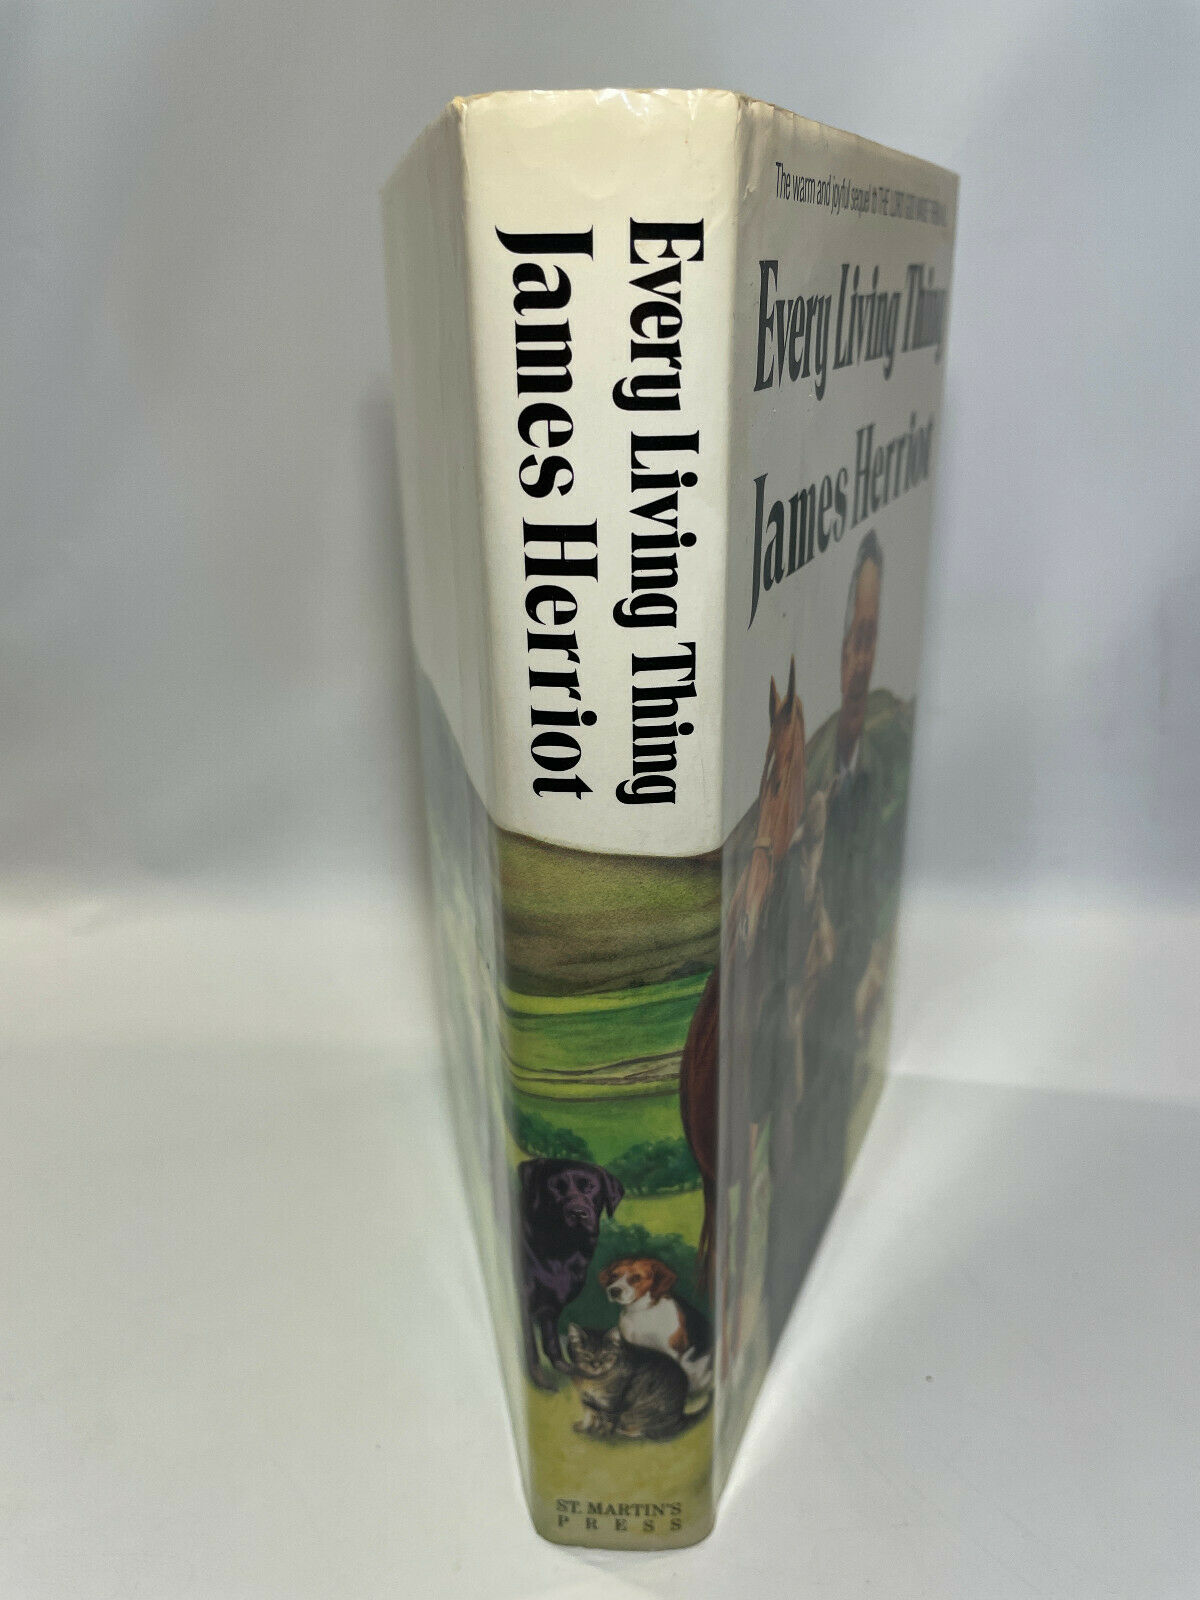 Every Living Thing by James Herriot w/ Clippings